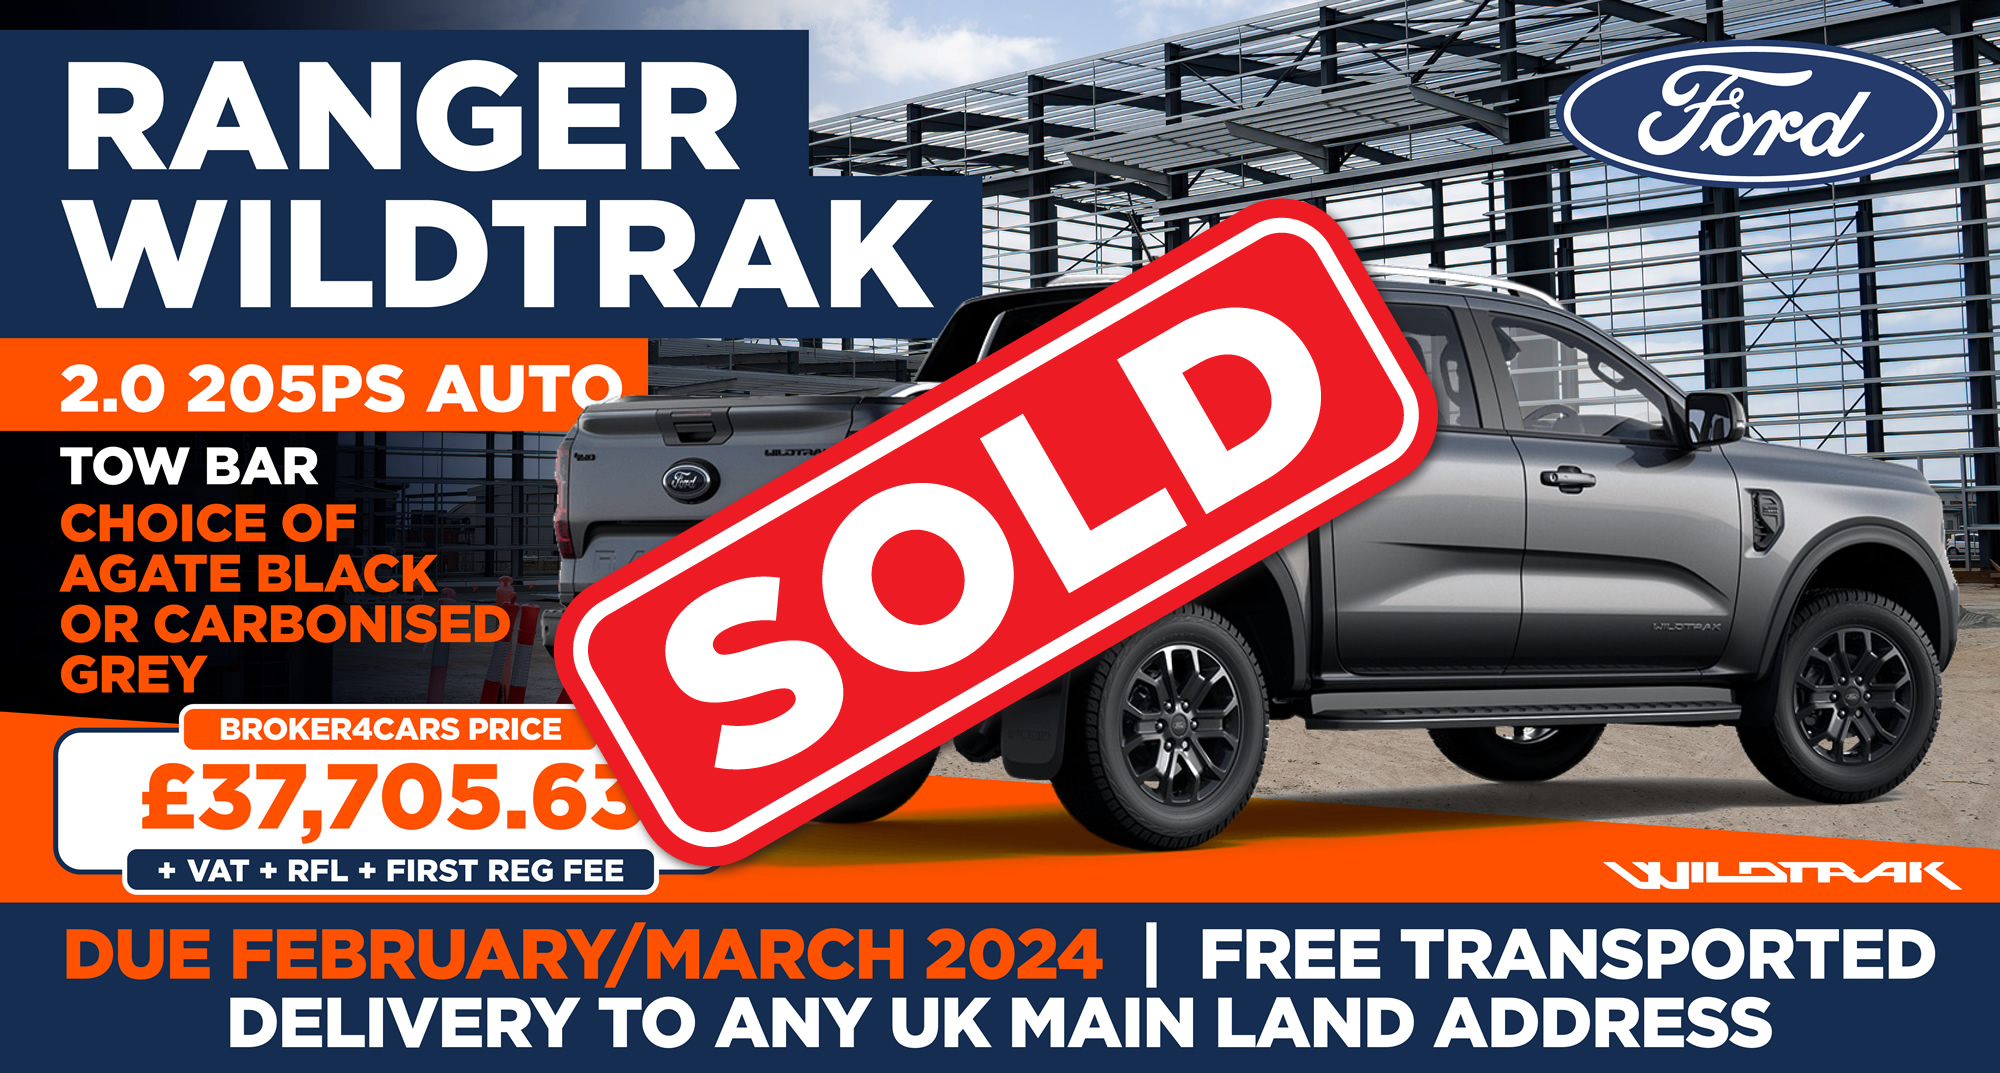 Ranger Wildtrak 2.0 205PS AutoTow Bar, Choice of Agate Black or Carbonised Grey